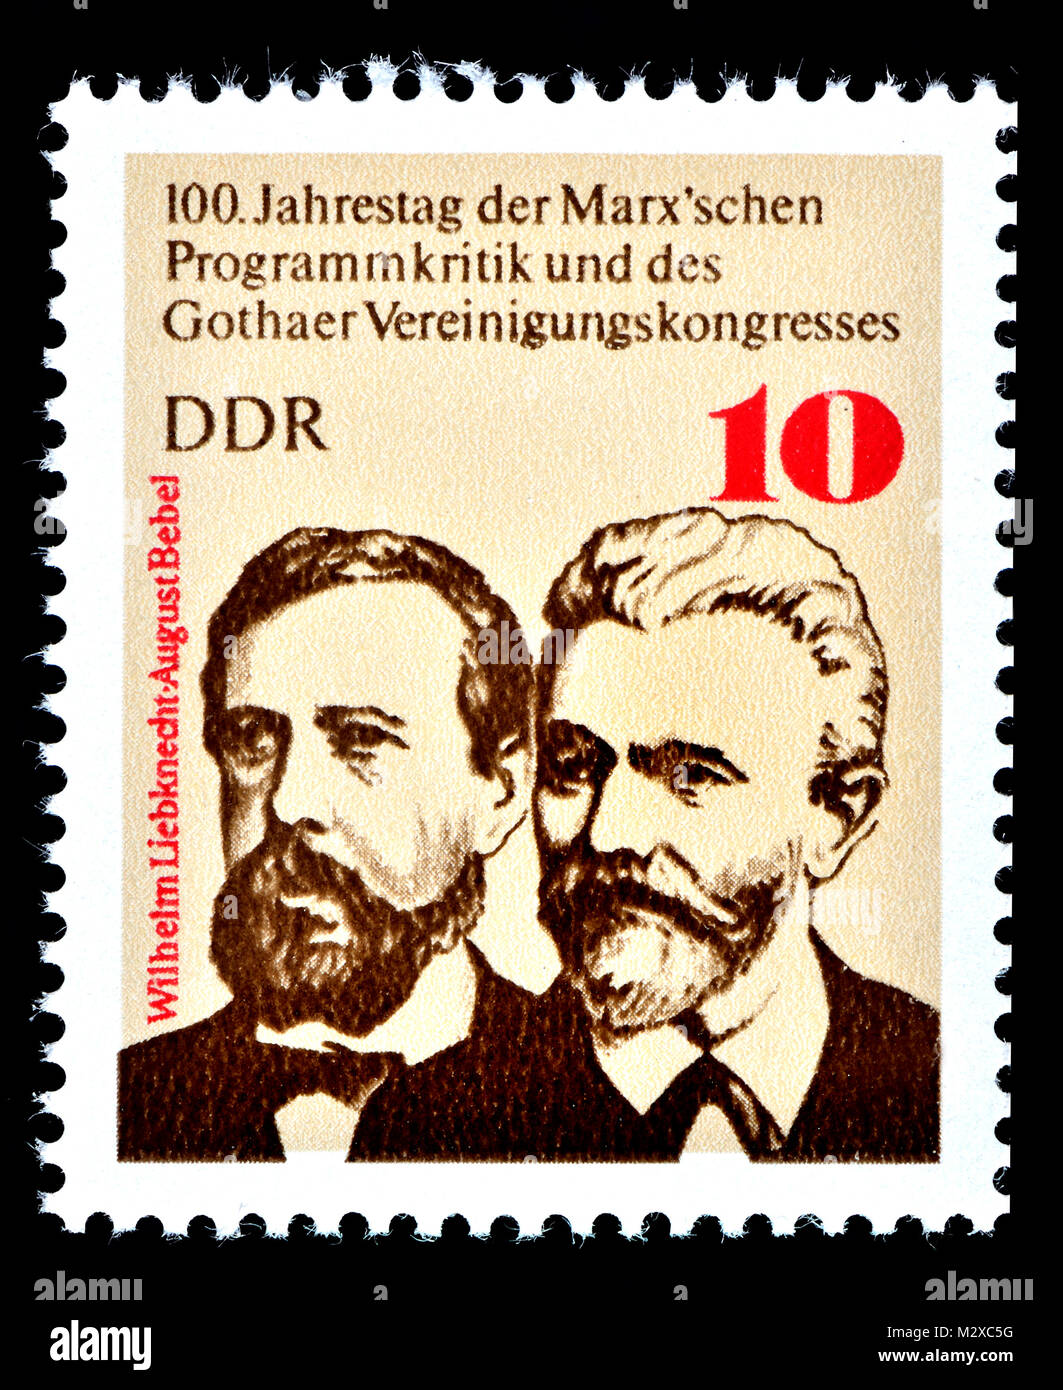 East German postage stamp (1975) : 100th anniversary of the Karl Marx's Critique of the Gotha Program (Kritik des Gothaer Programms) in 1875. .... Stock Photo